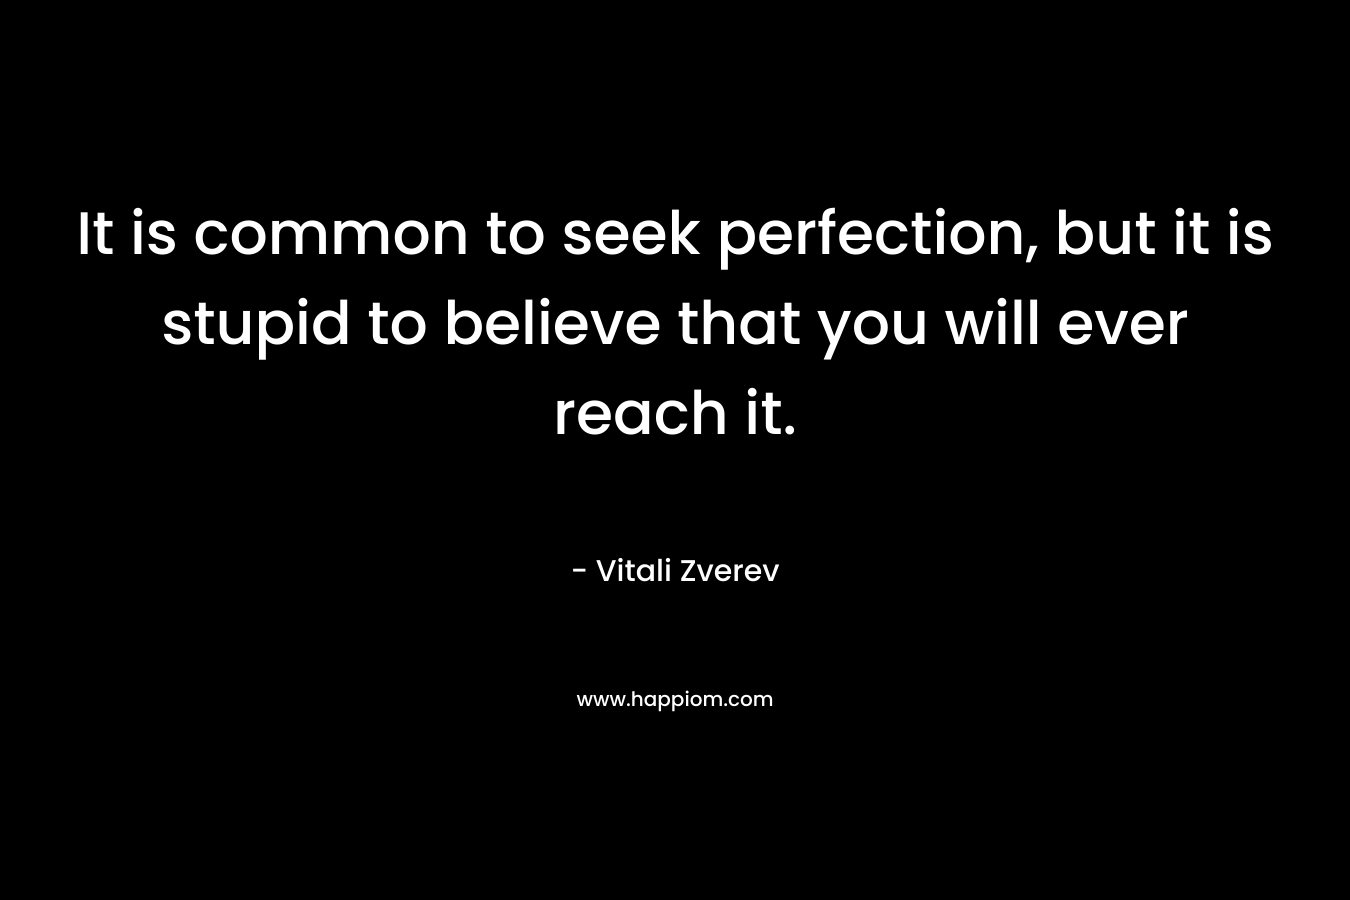 It is common to seek perfection, but it is stupid to believe that you will ever reach it. – Vitali Zverev